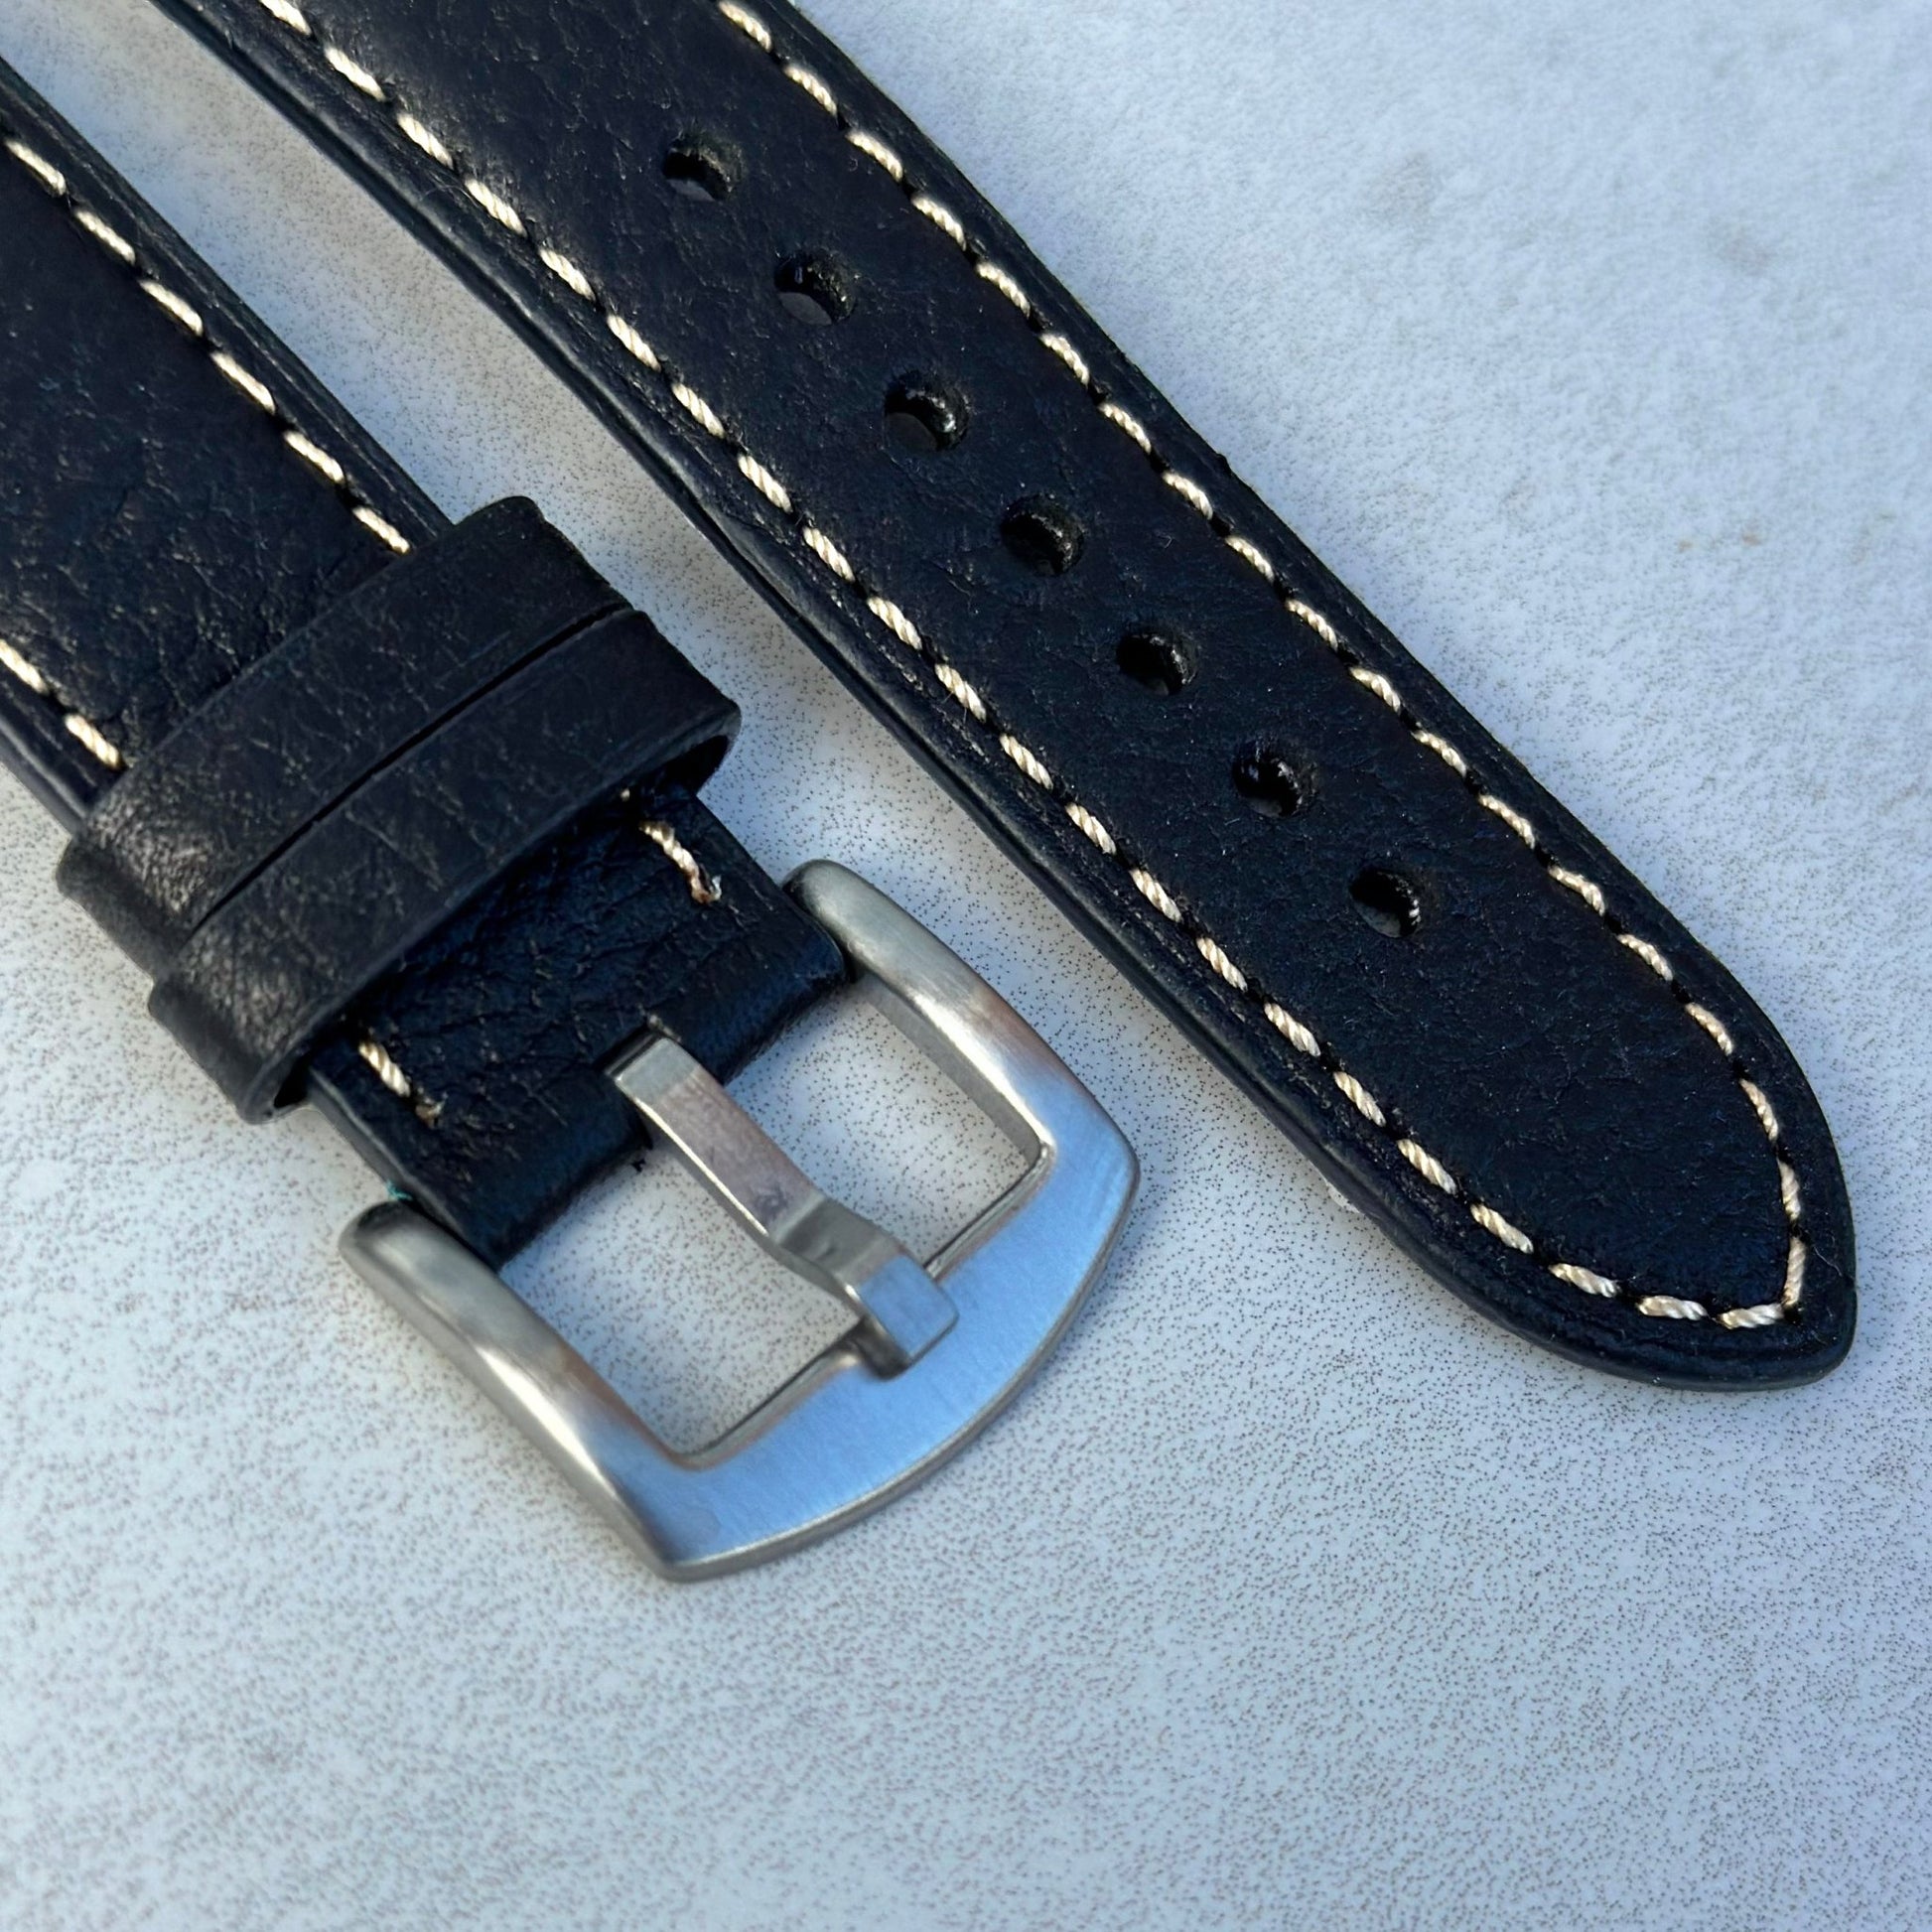 Brushed 316L stainless steel buckle on the Rome jet black Italian leather watch strap. Watch And Strap.